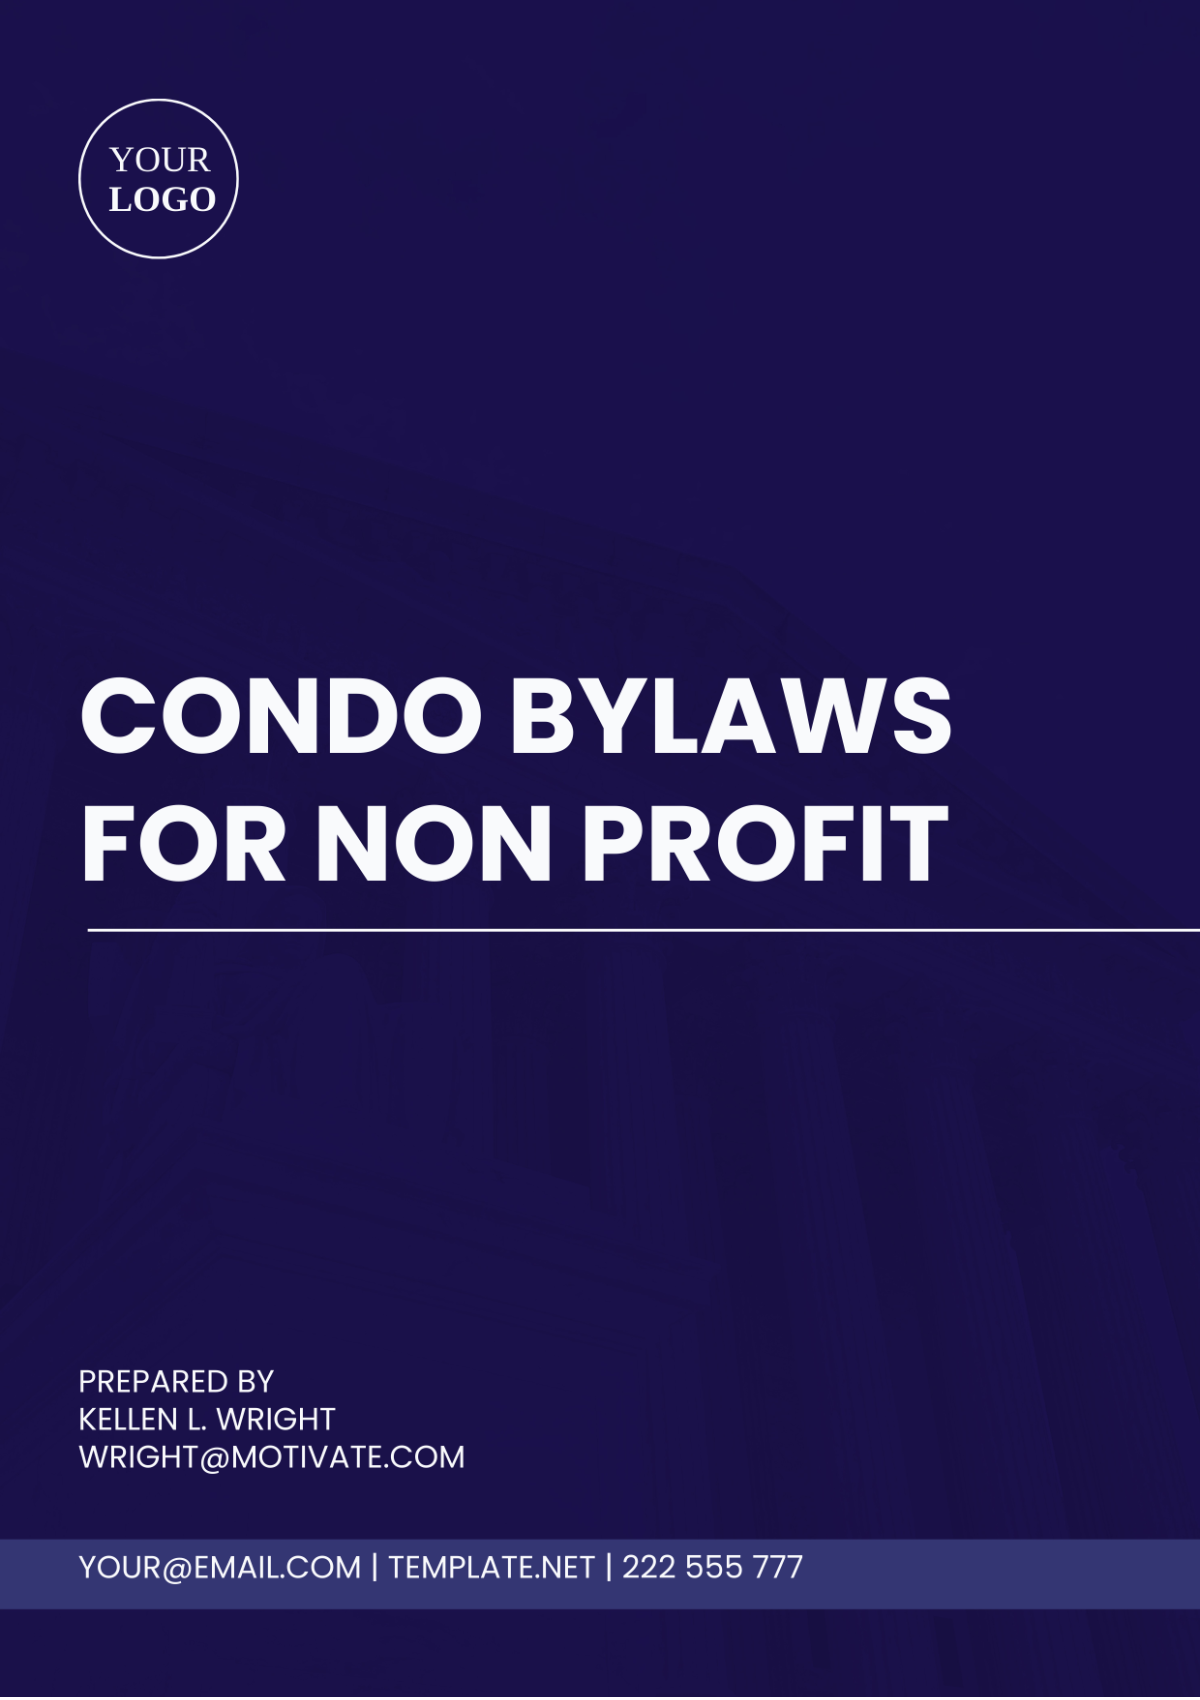 Condo Bylaws for Non Profit Template